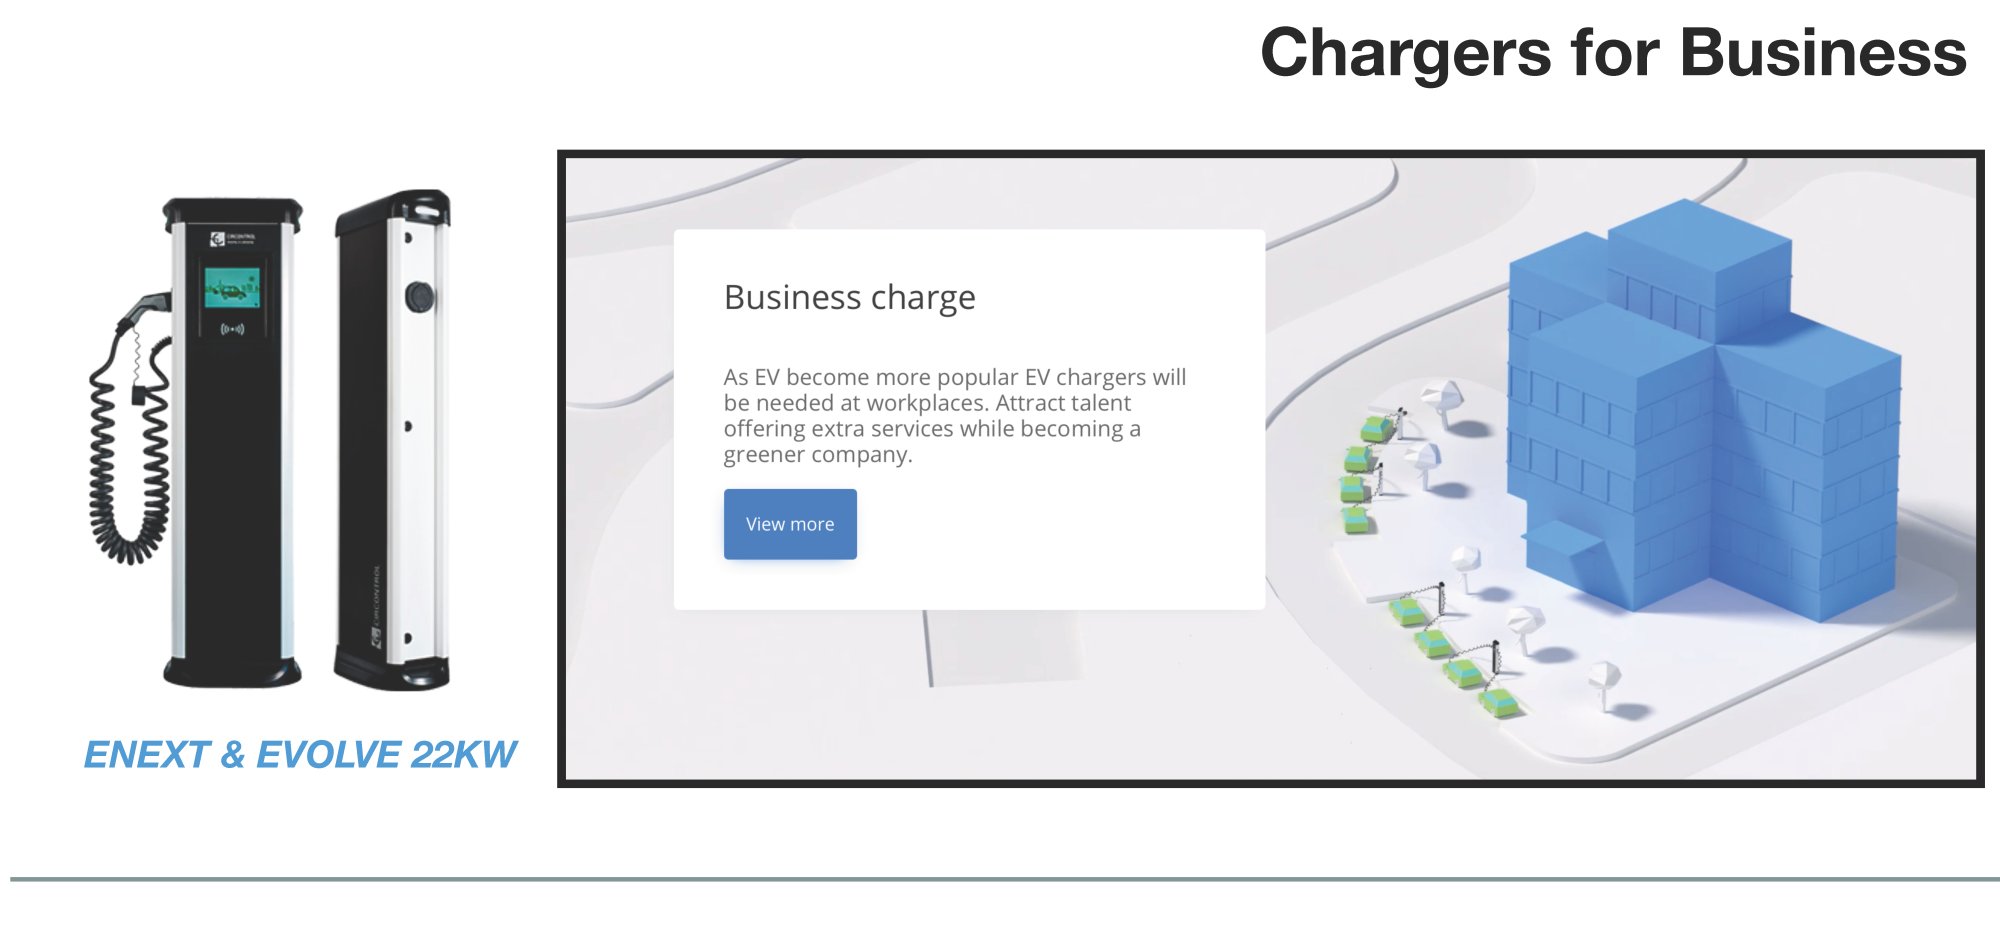 Chargers for business